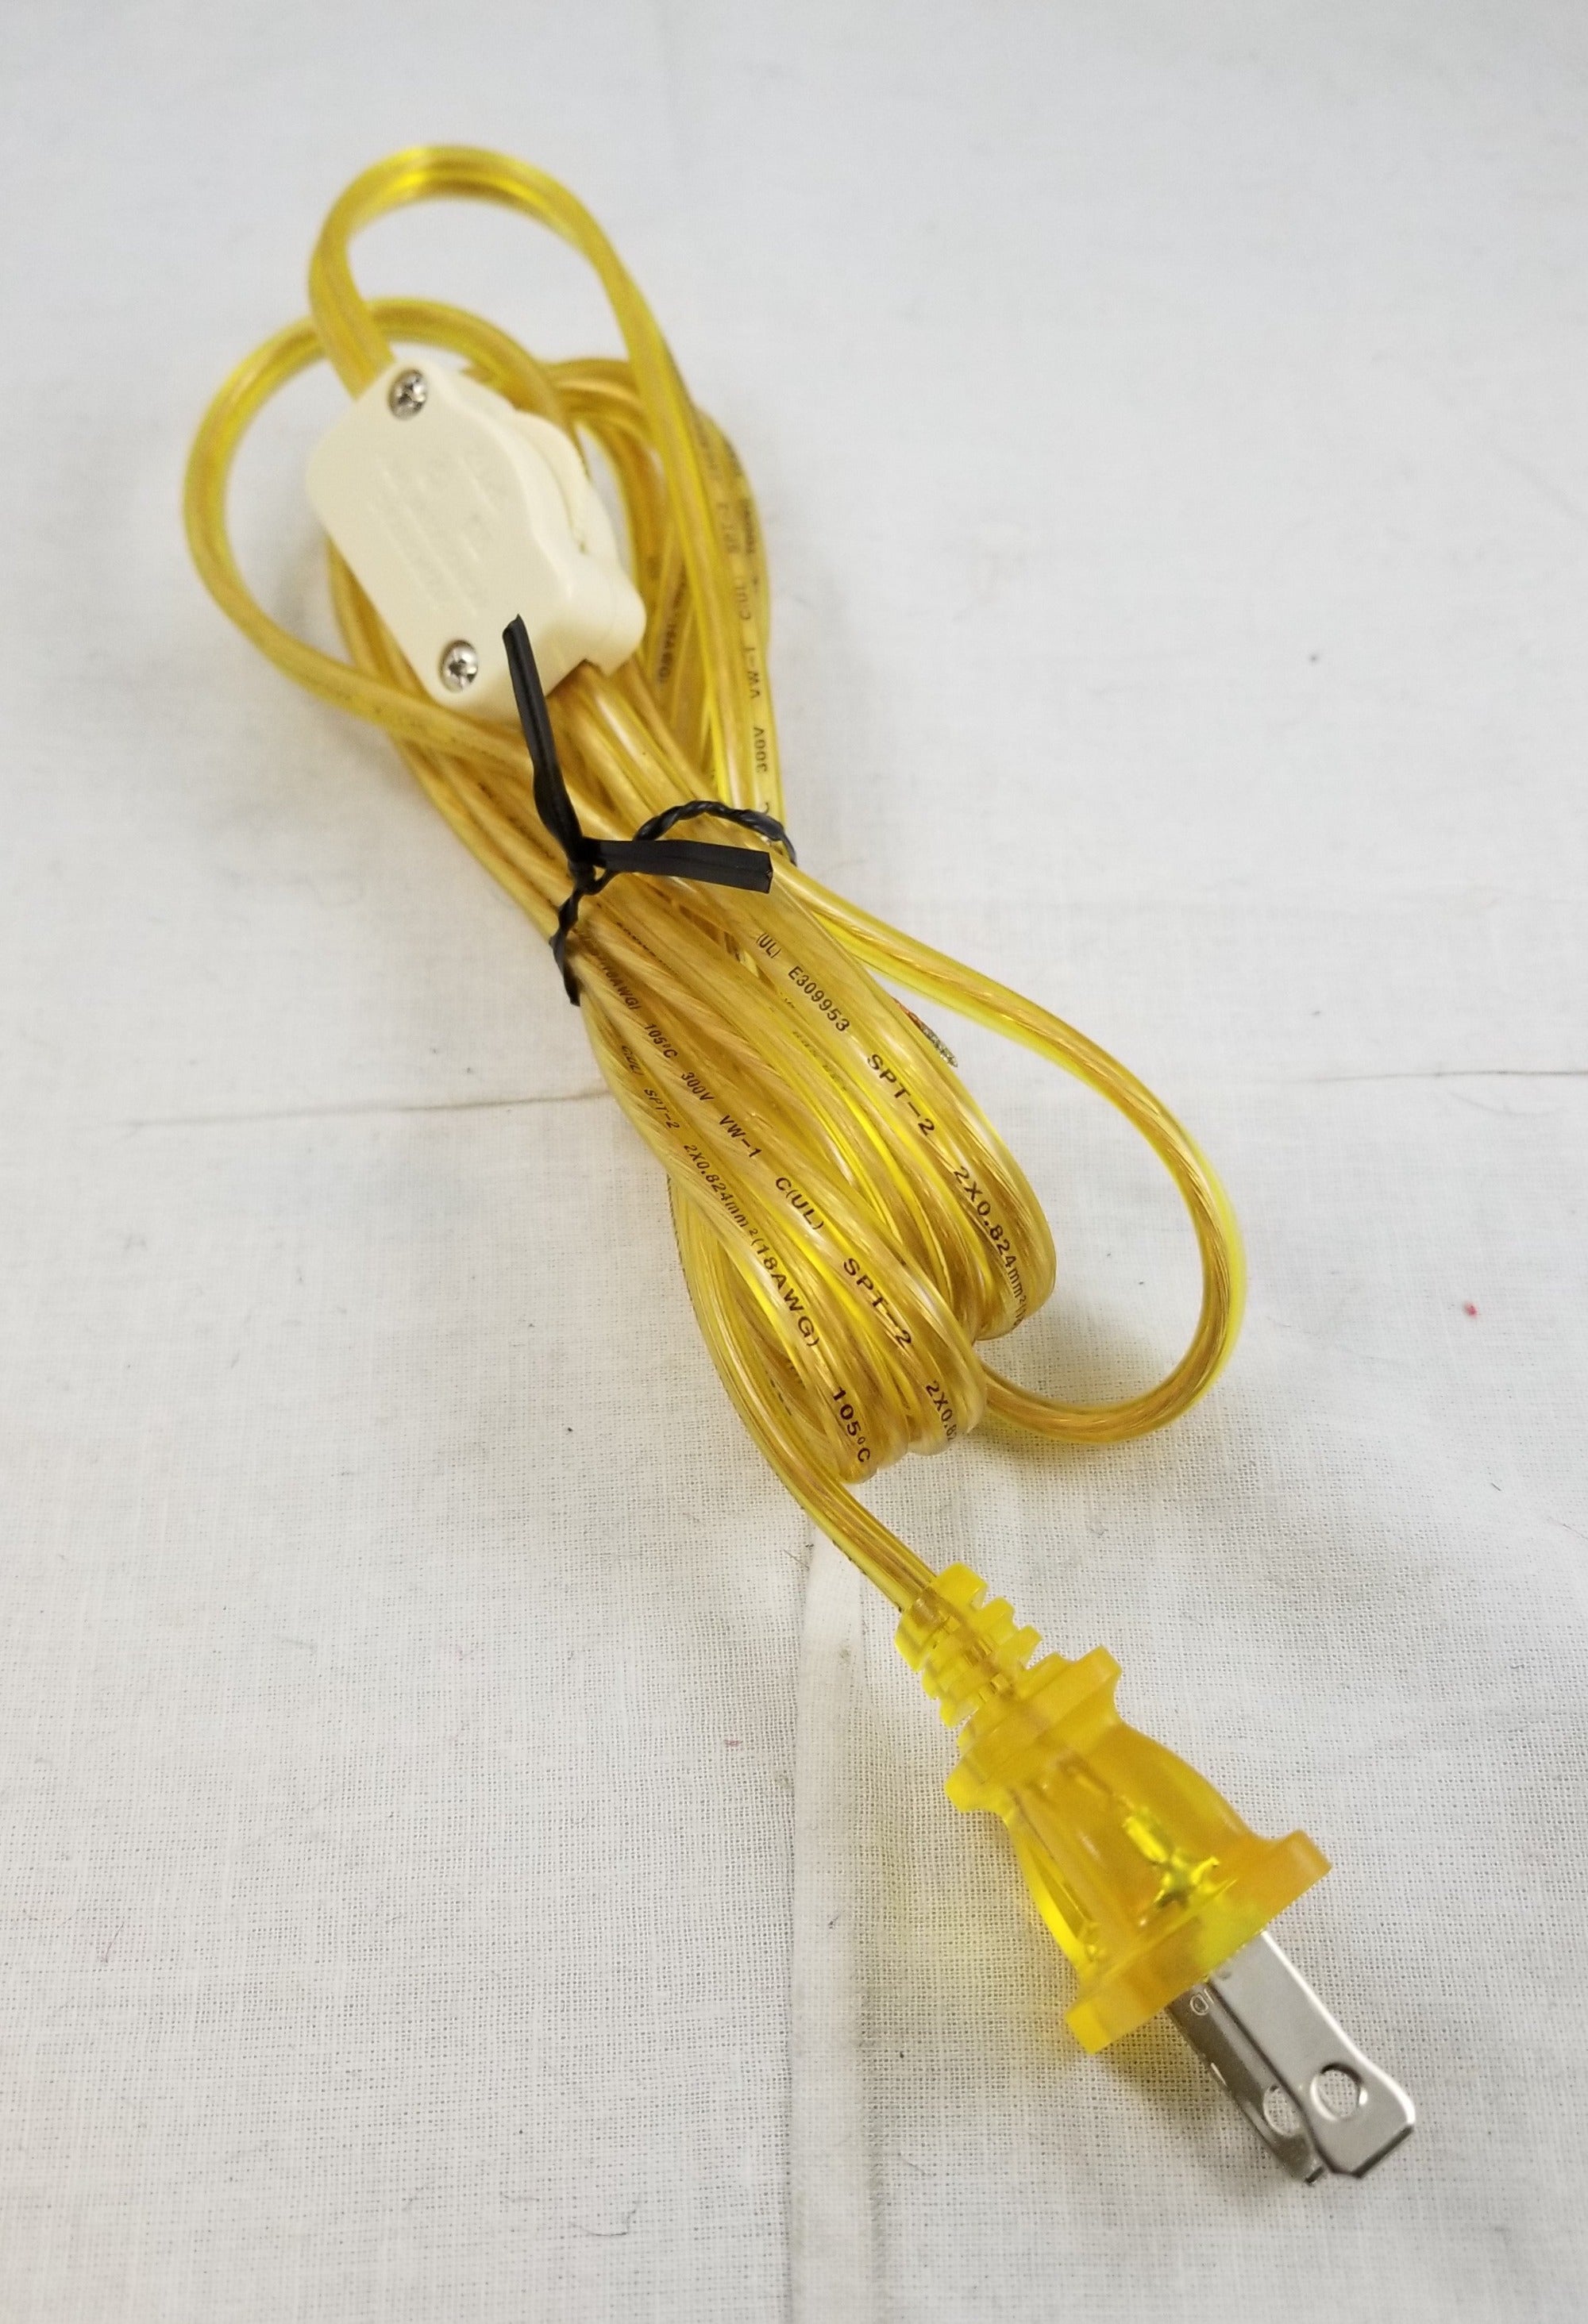 8ft Gold Cord Aet - SPT2 - with Ivory Hi-Low Switch